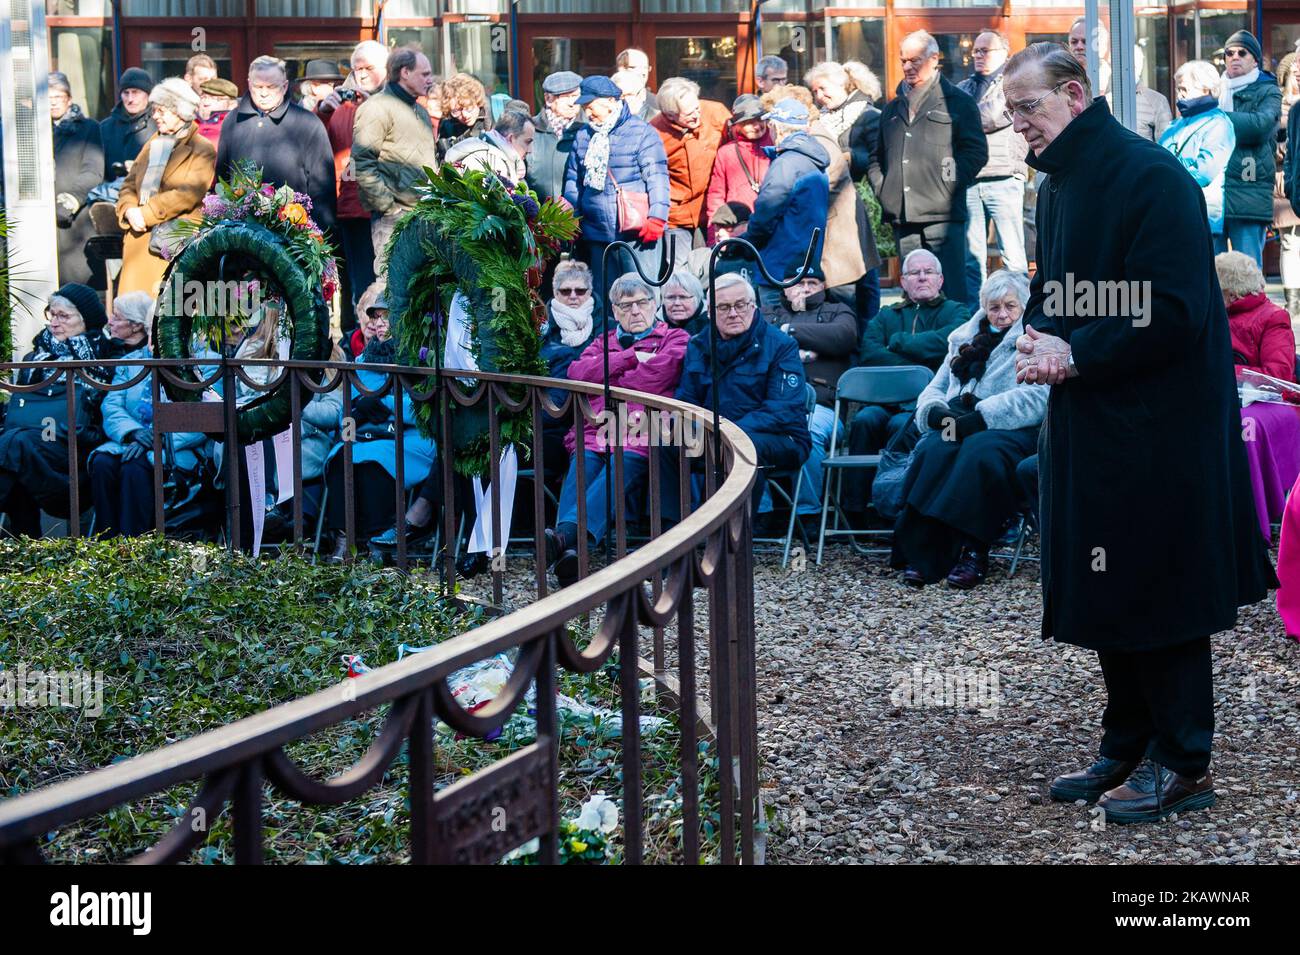 People take part at annual commemoration of the bombing in Nijmegen, Netherlands, on 22 February 2018. he Bombing of Nijmegen was an unplanned bombing attack by American aircraft on the city of Nijmegen in the Netherlands on 22 February 1944. During this Allied mistake bombing, almost 800 people were killed and a large part of the city center of Nijmegen was destroyed. Every February 22nd an official commemoration has take place at the Raadhuishof, the location where the Montessori school was located, where 24 children and 8 sisters were killed. There a monument called 'De Schommel' was erecte Stock Photo